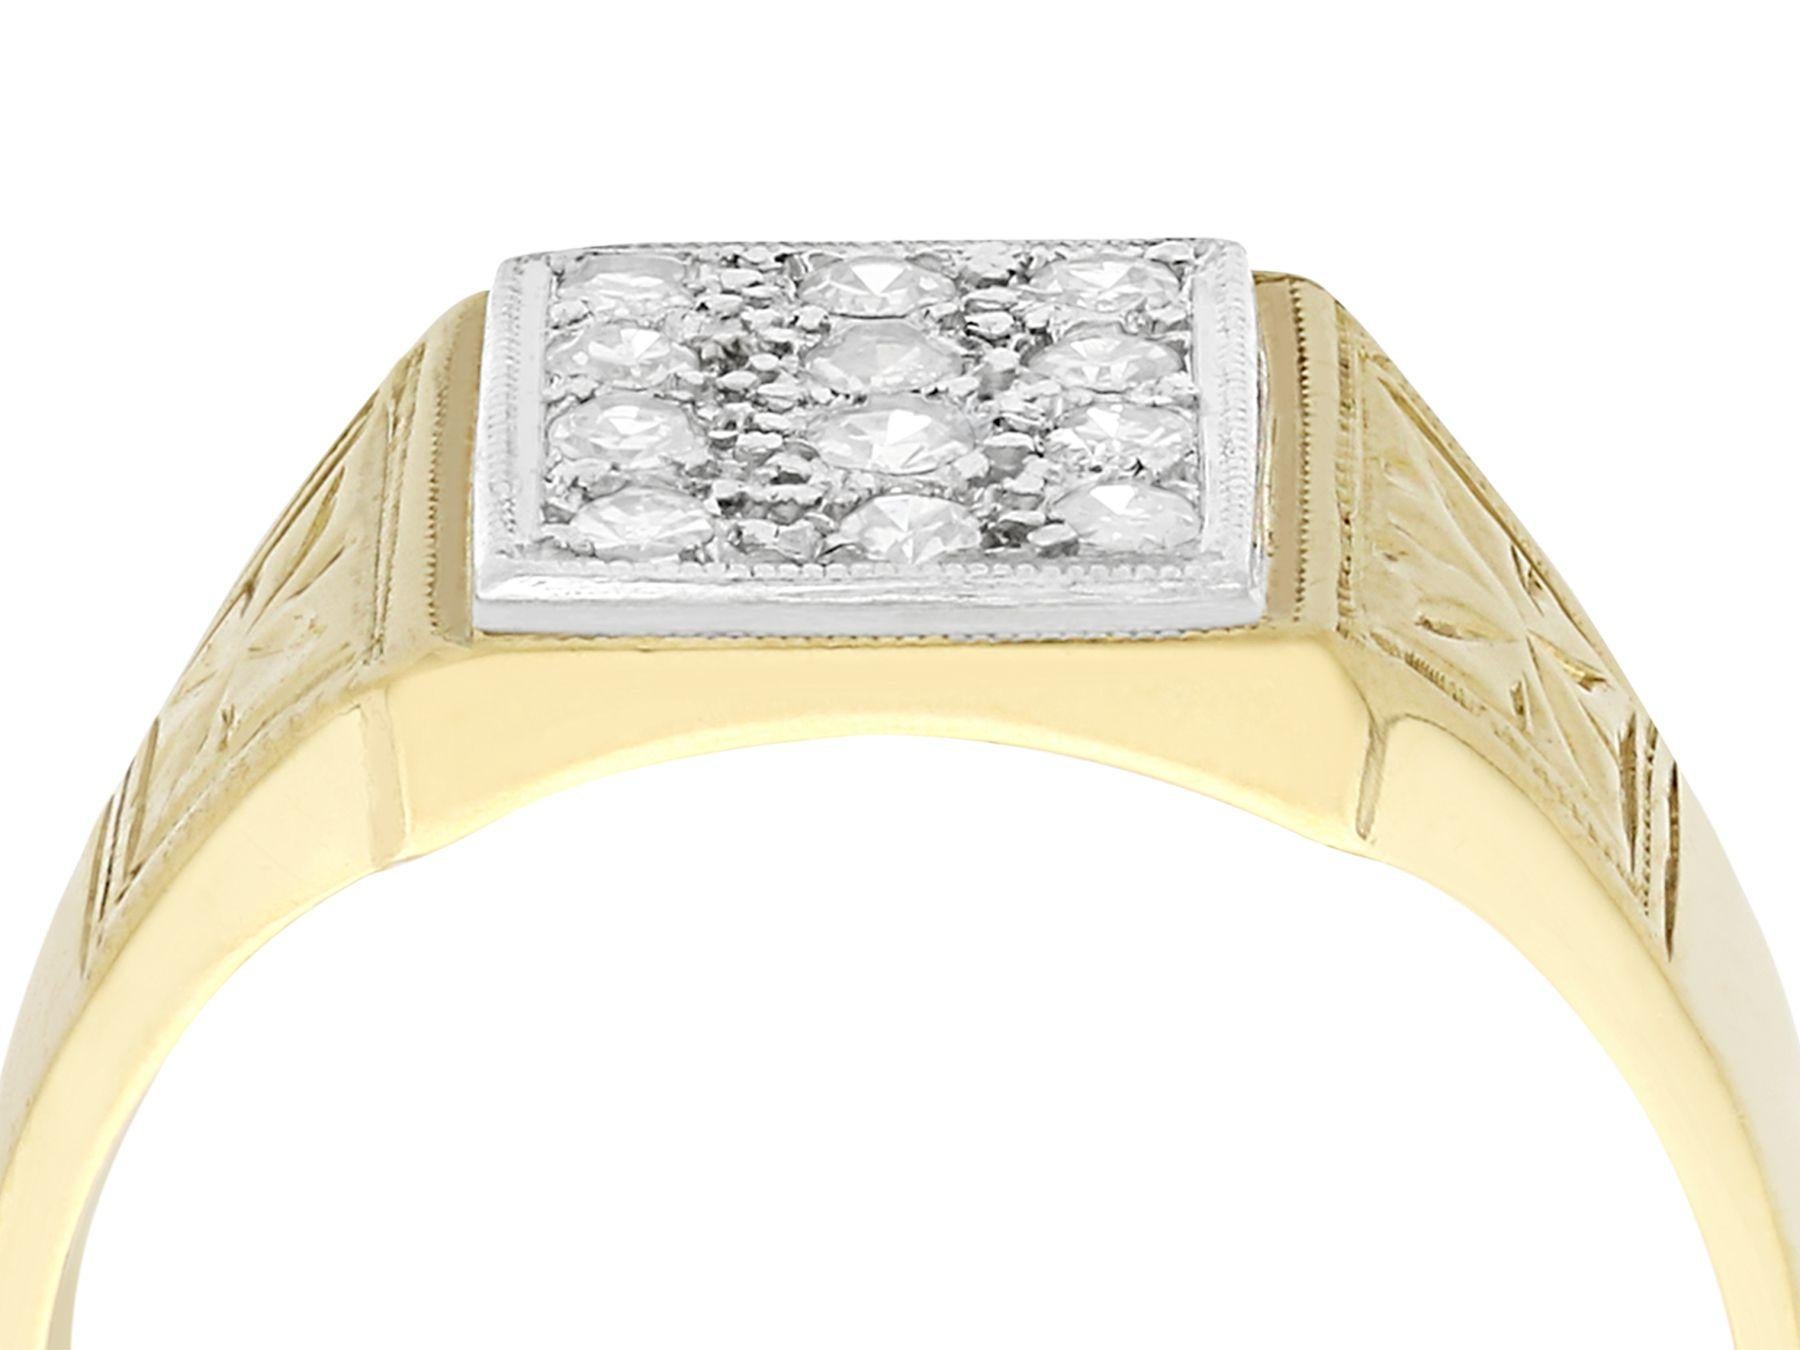 An impressive vintage 0.52 carat diamond and 18 karat yellow gold, 18 karat white gold set signet style dress ring; part of our diverse diamond jewelry collections.

This fine and impressive diamond set signet ring has been crafted in 18k yellow